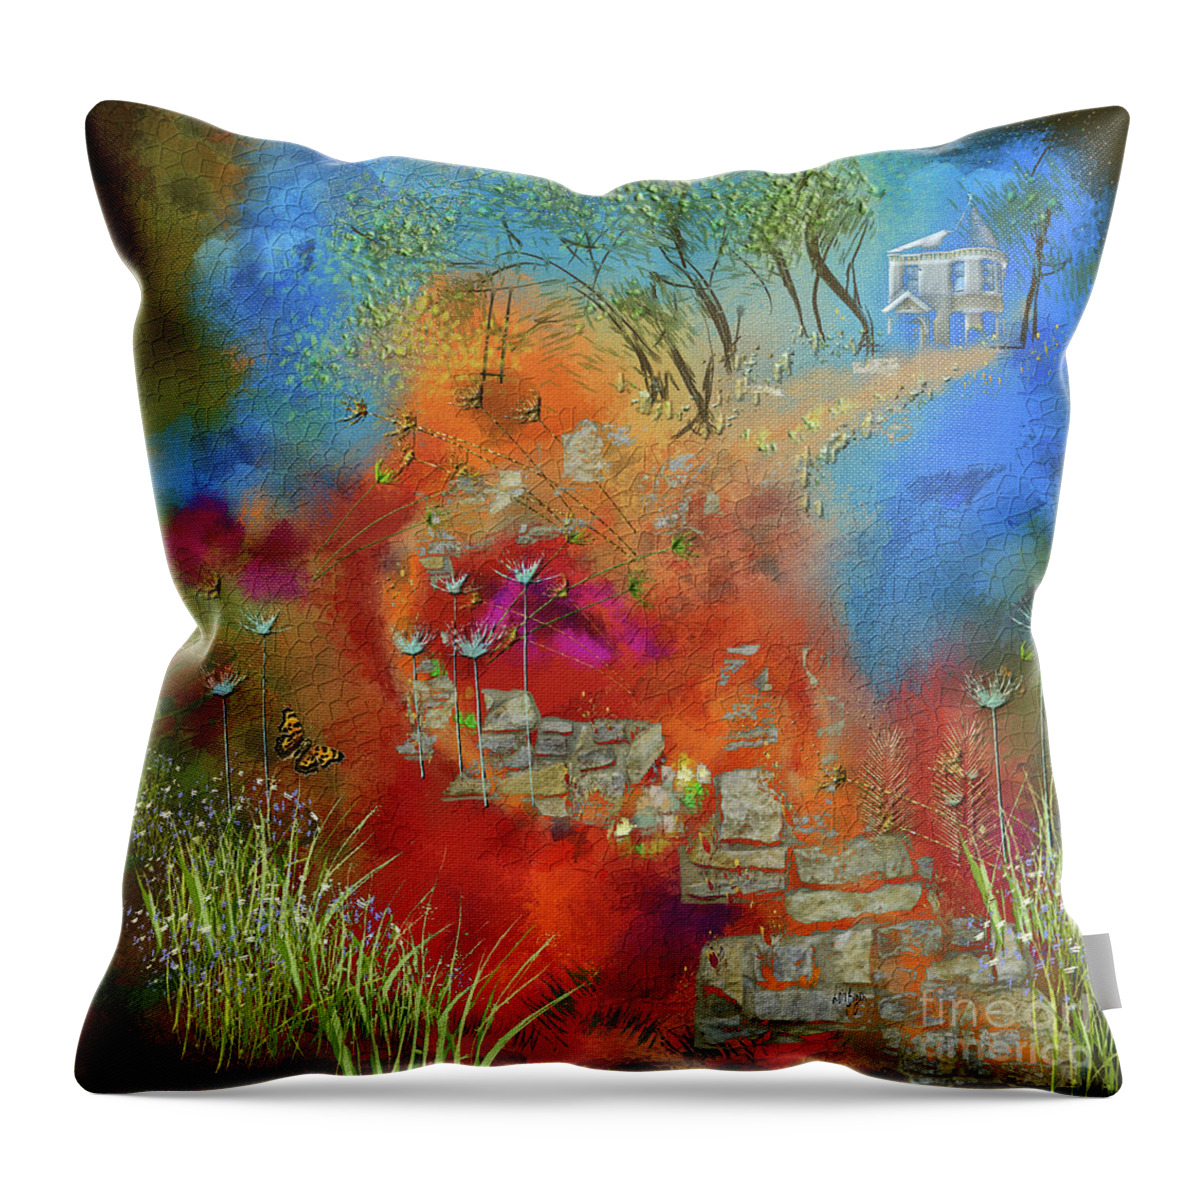 Path Throw Pillow featuring the digital art The Path Back To Childhood by Lois Bryan